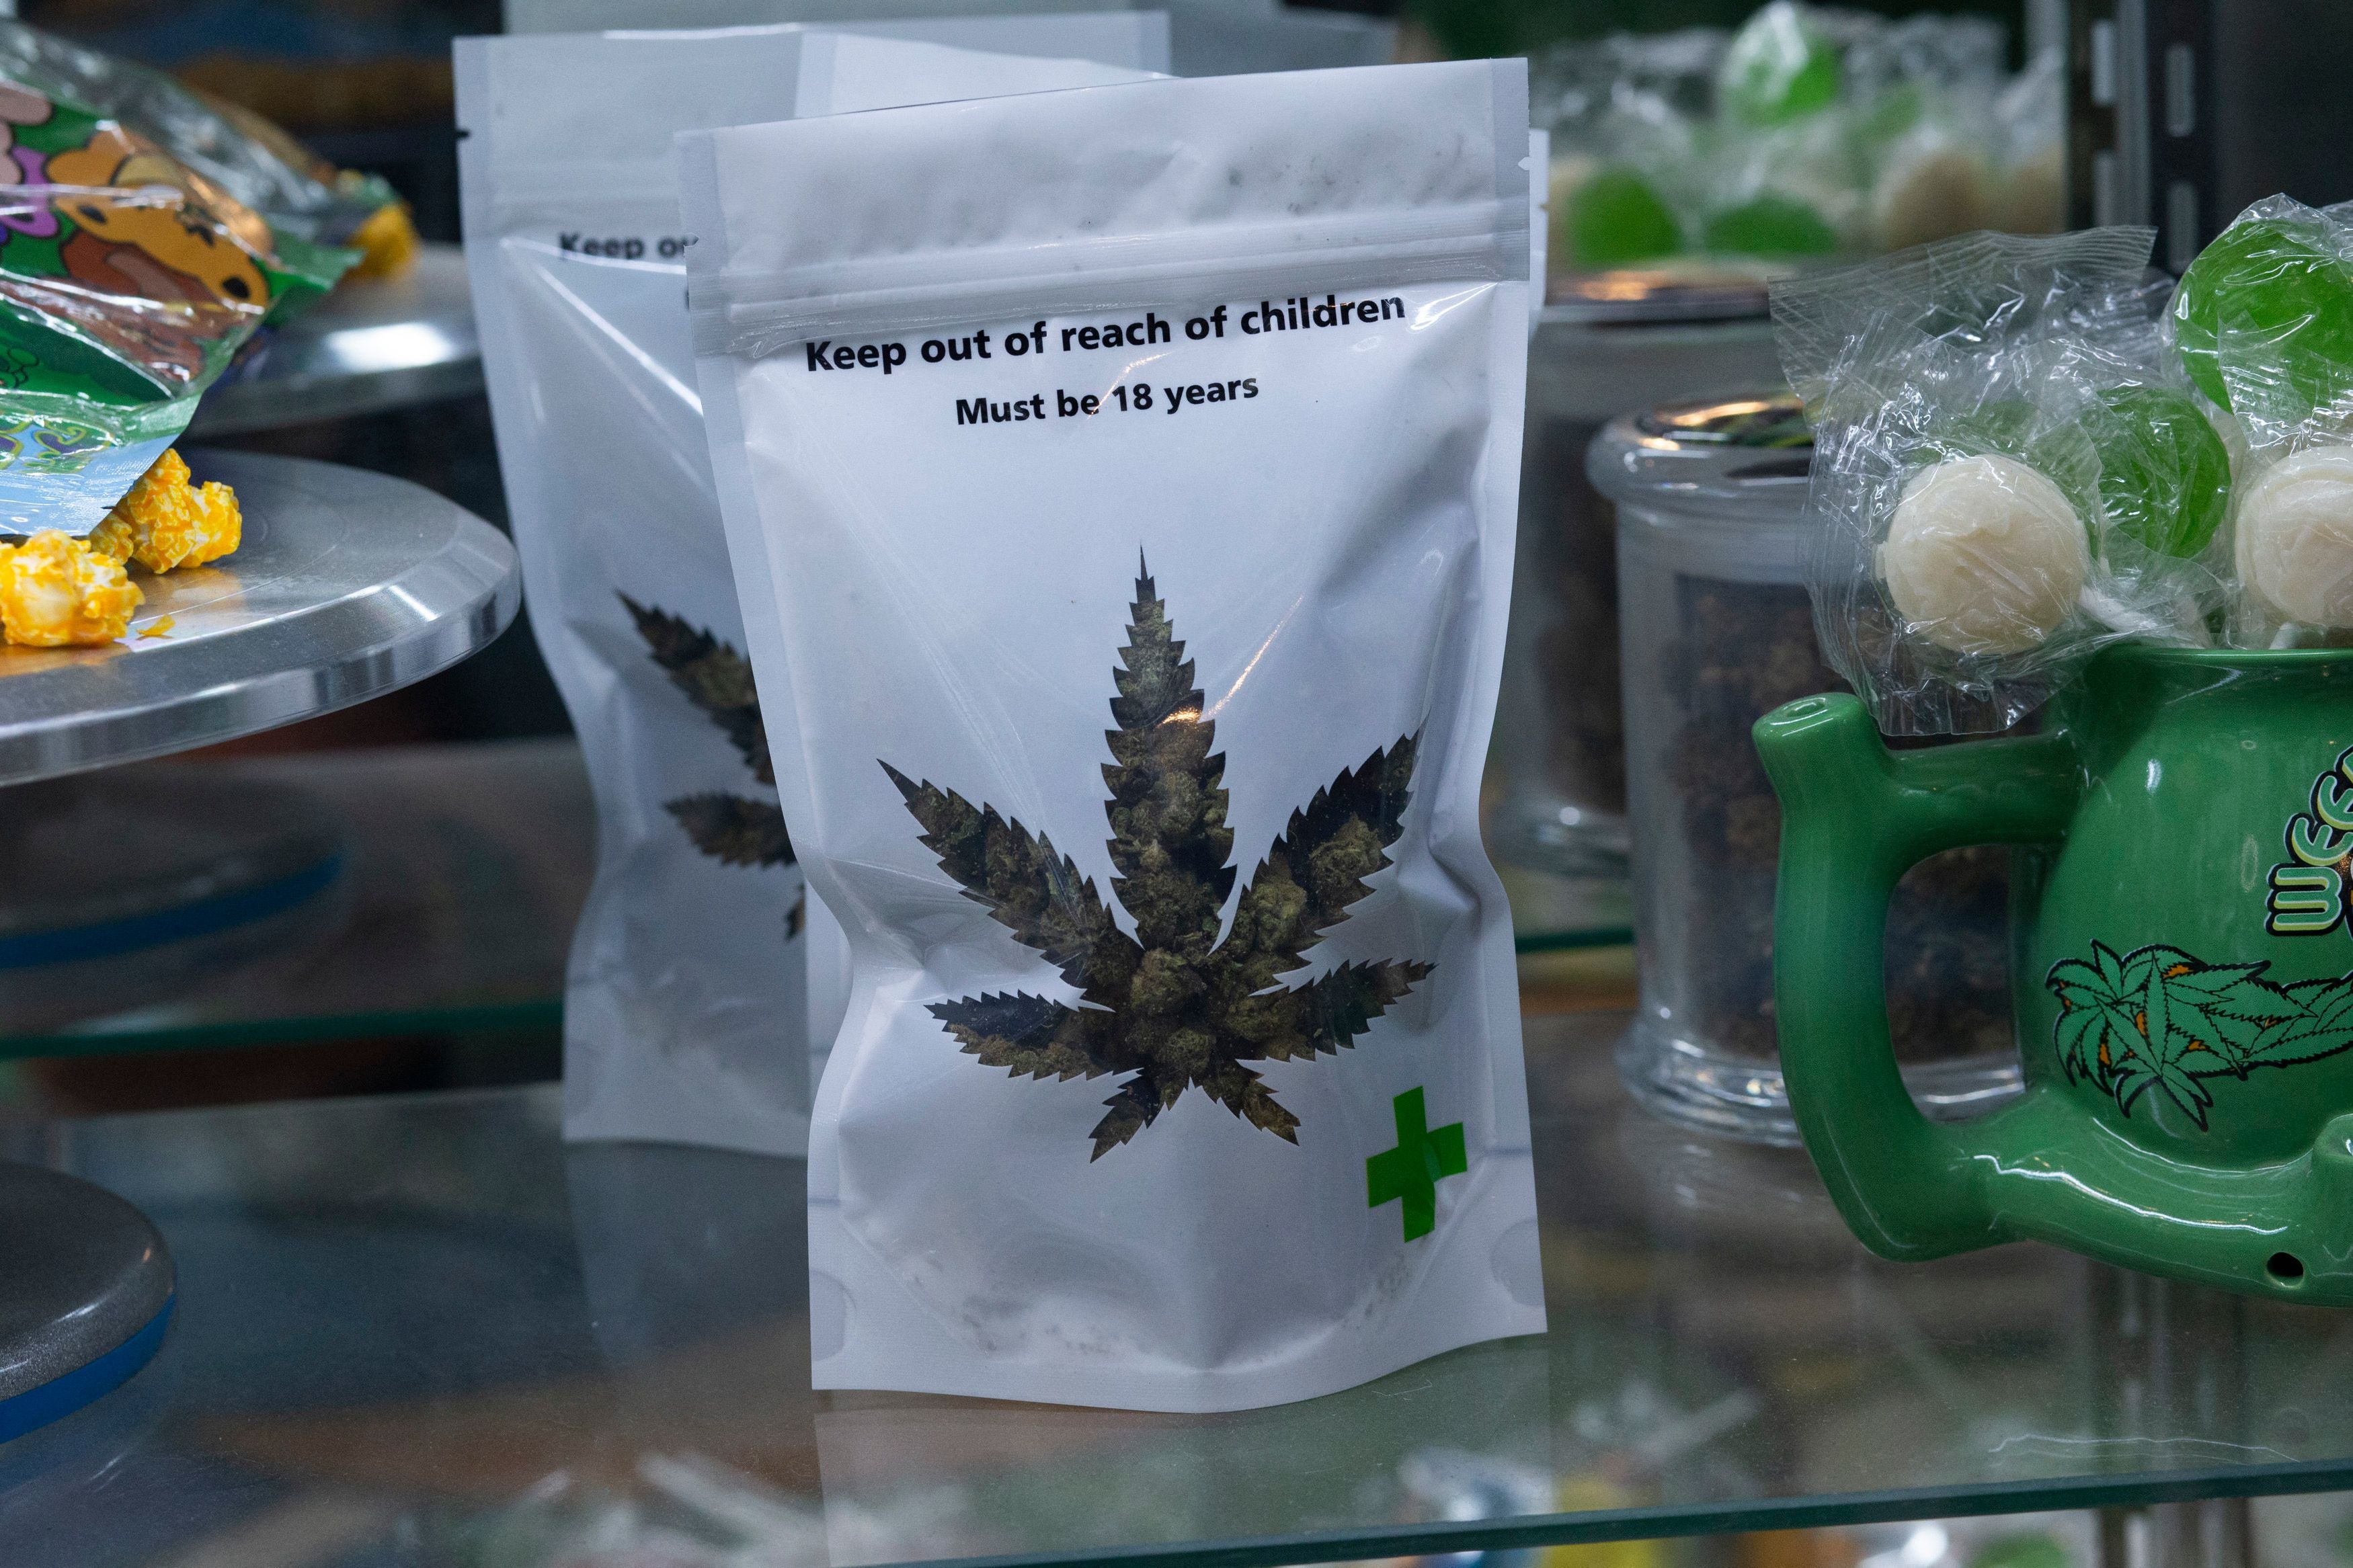 Experts analysed data from the United States that showed a “small but significant” increase in motor collisions and deaths (pictured: Marijuana products on display in shop in New York)